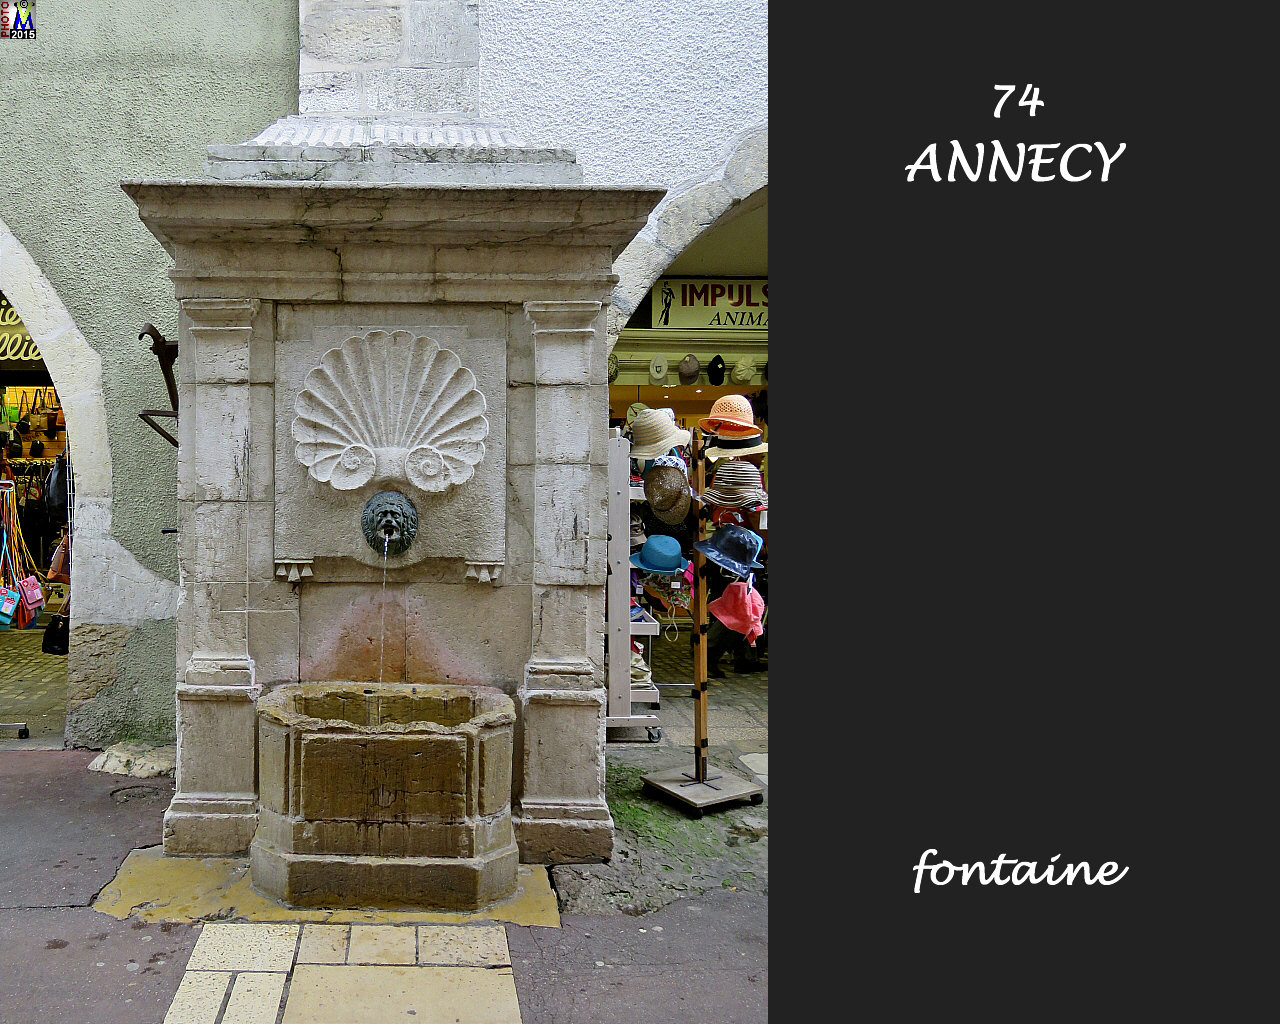 74ANNECY_fontaine_150.jpg